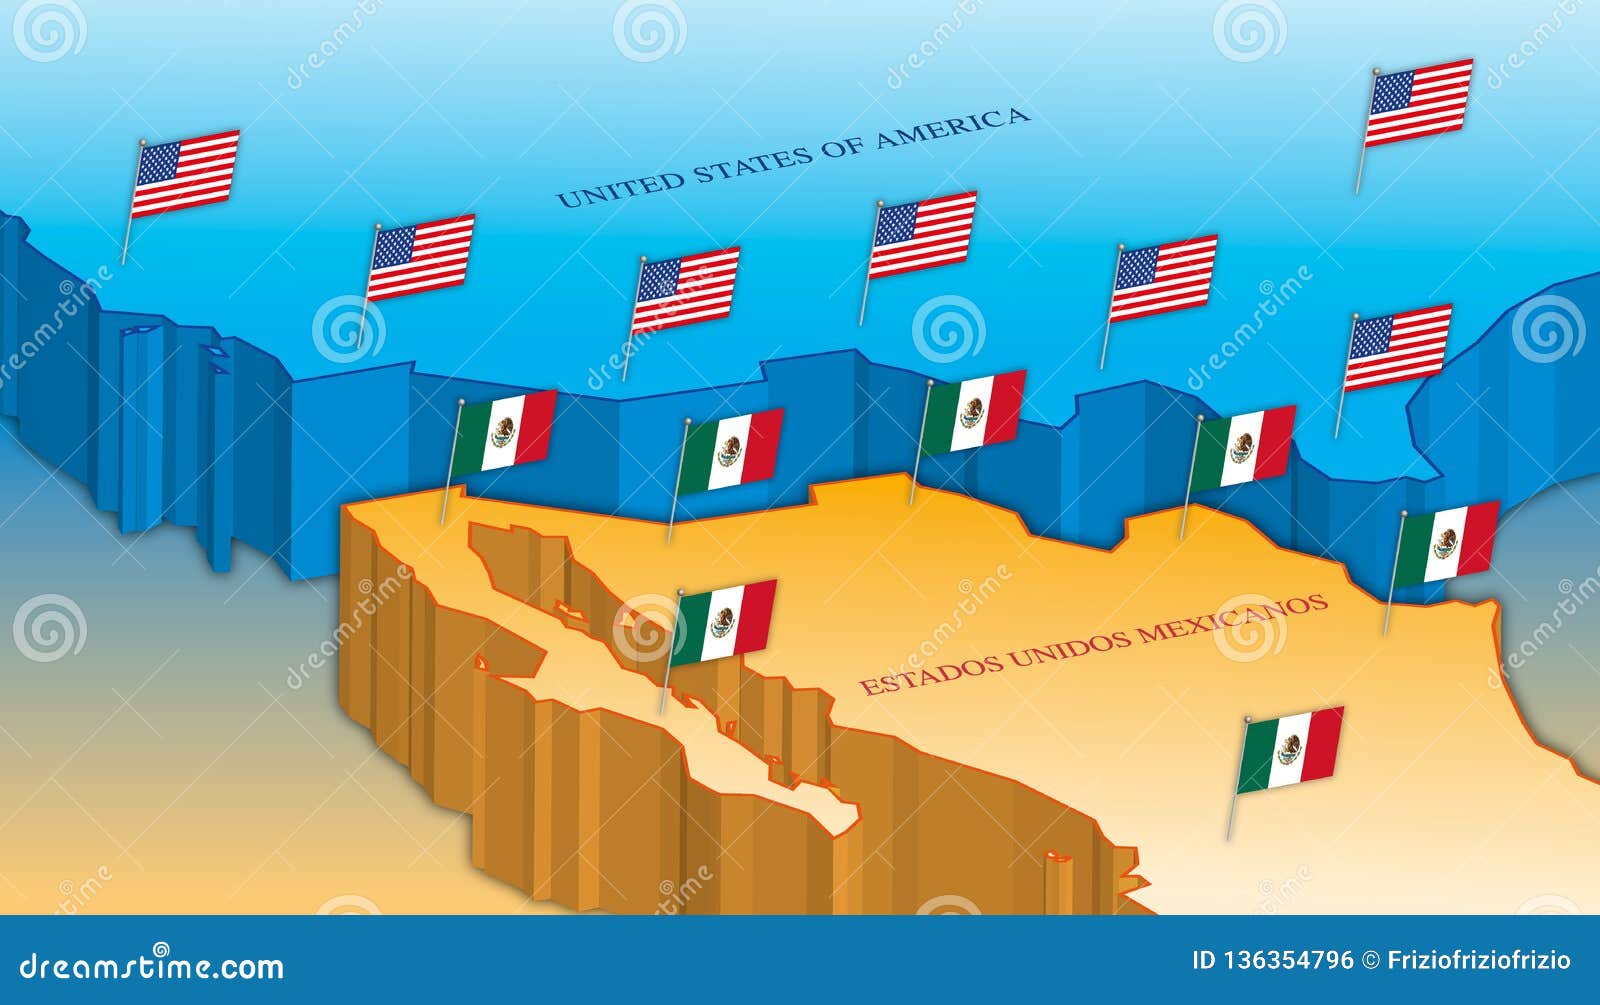 usa and mexico border map with national flags